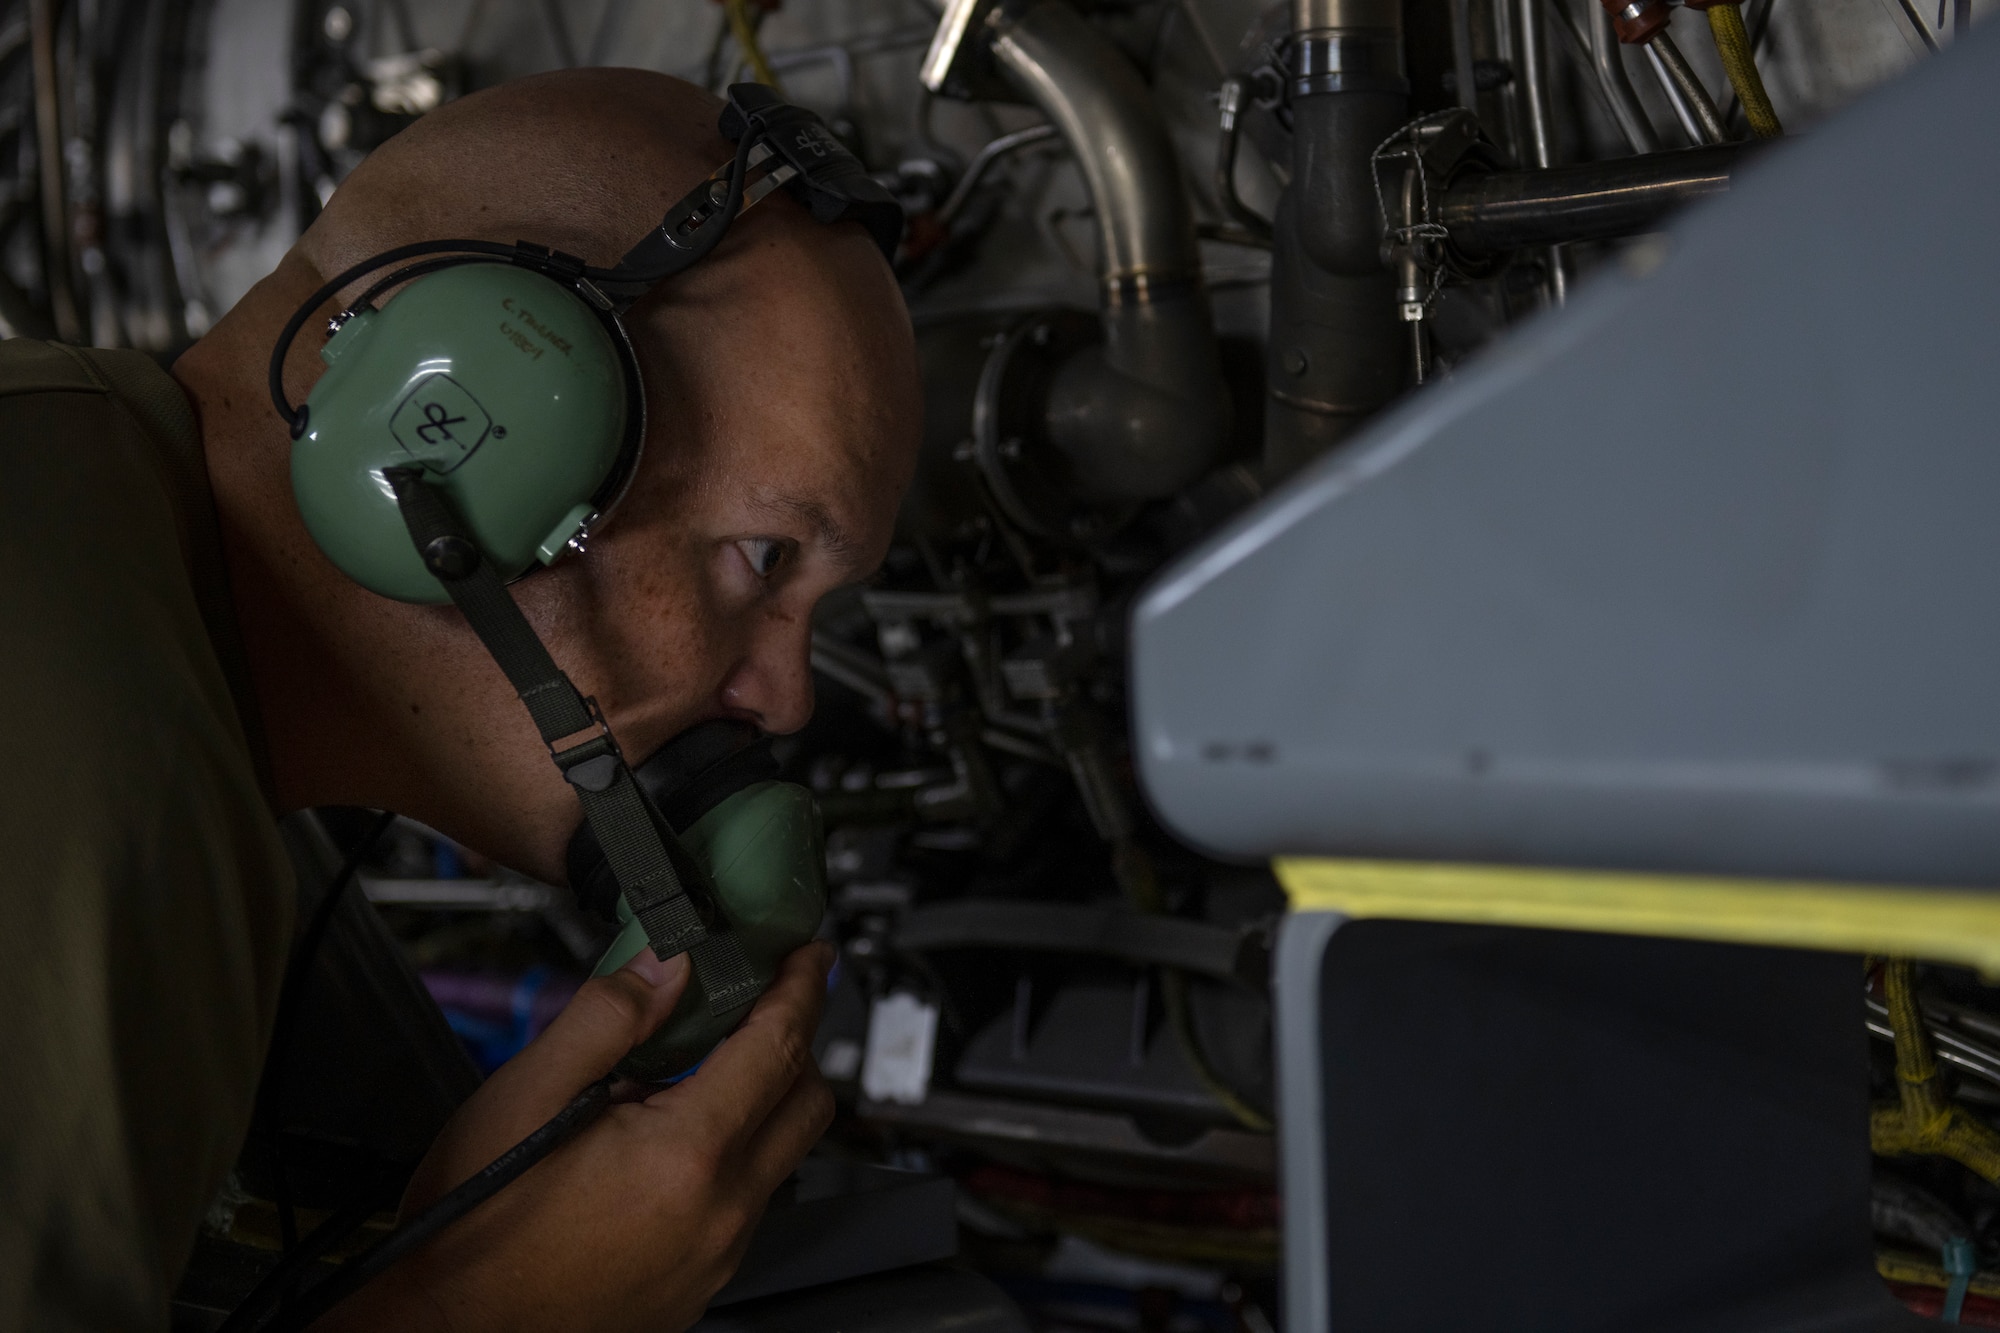 U.S. Air Force Staff Sgt. Wallace Winkler, 18th Component Maintenance Squadron test cell craftsman, inspects components of an F-15C Eagle engine inside the test cell at Kadena Air Base, Japan, Aug. 25, 2022. Airmen assigned to the engine test cell check for leaks or damage before and after tests to ensure the engine is safe to use. (U.S. Air Force photo by Senior Airman Jessi Roth)